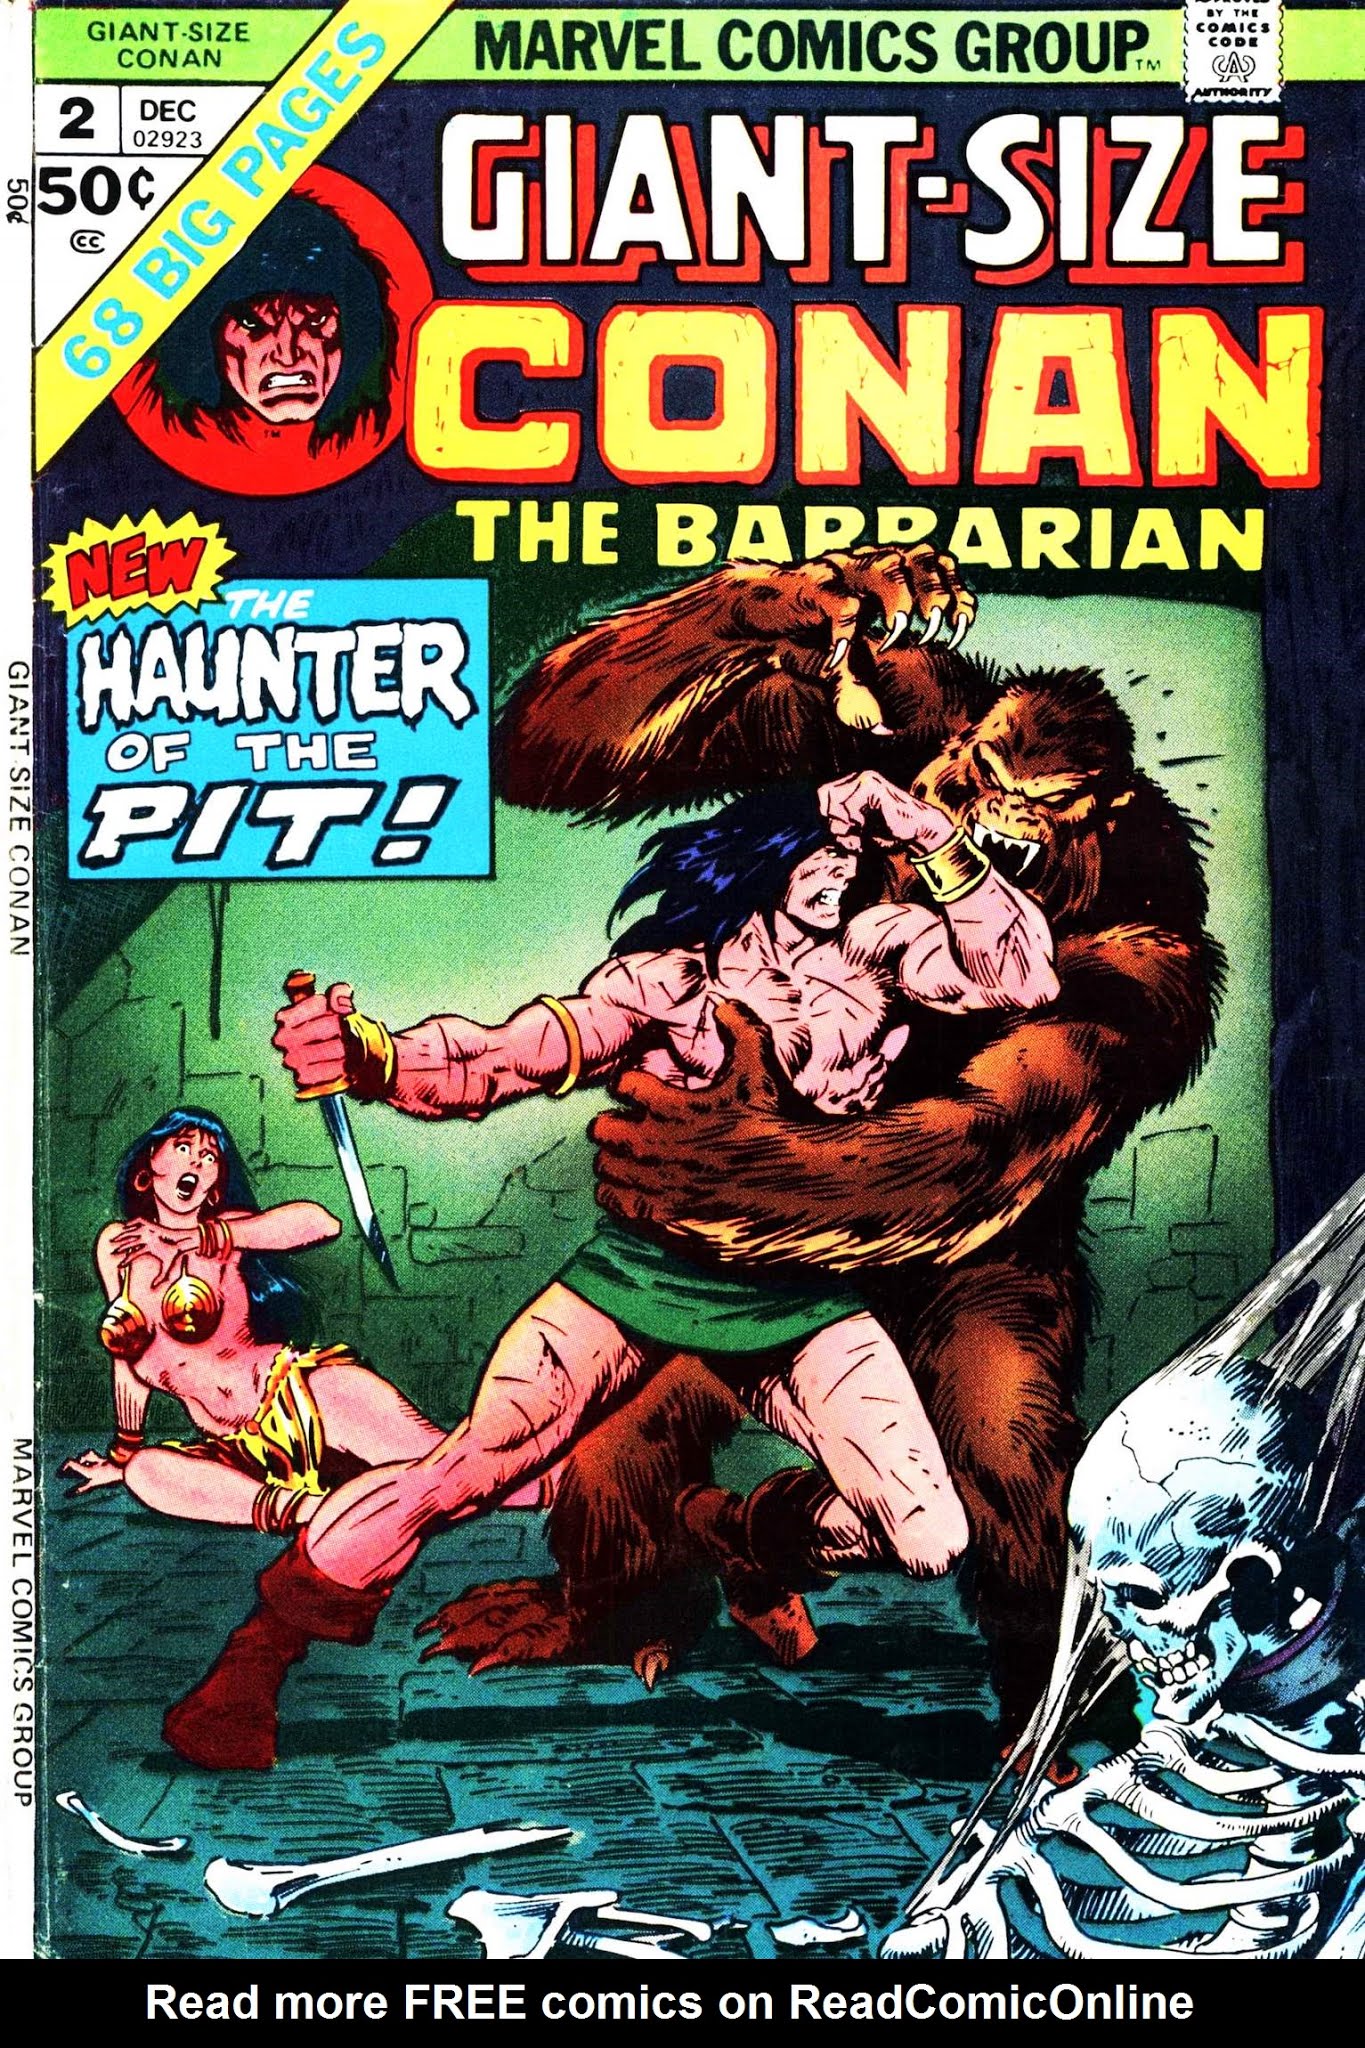 Read online Giant-Size Conan comic -  Issue #2 - 1